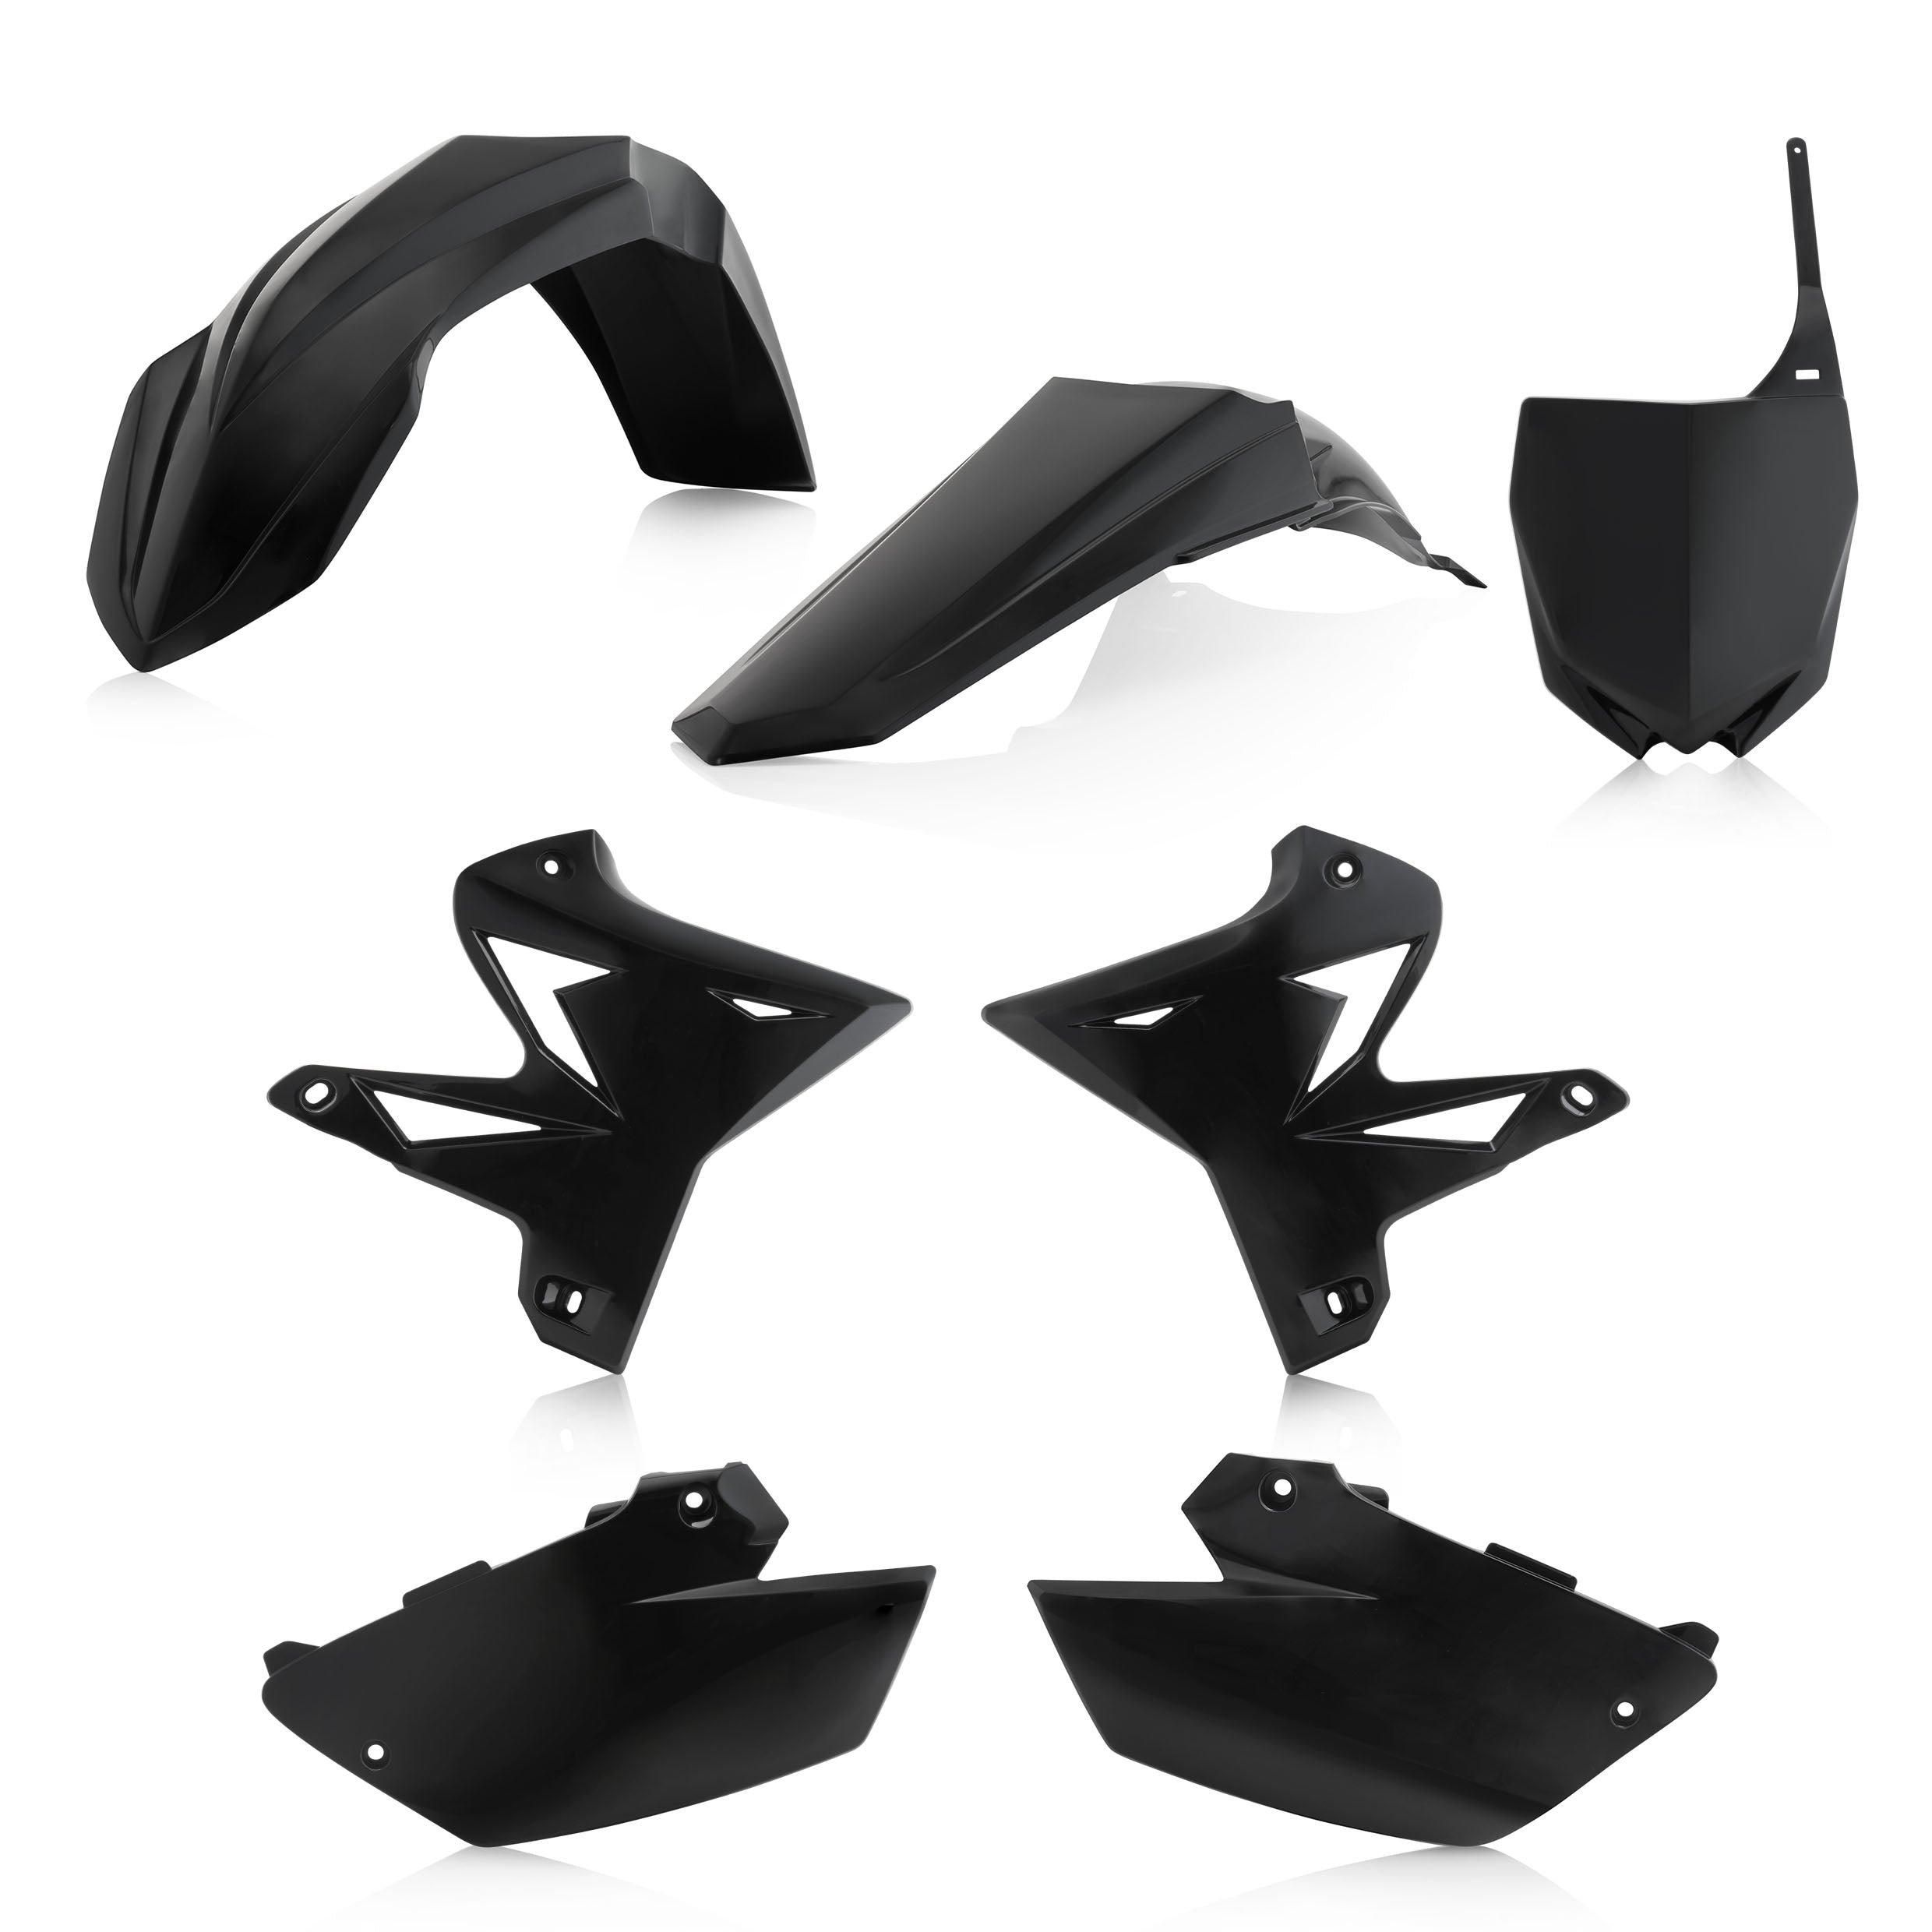 ACERBIS 0023488.090 KIT RESTYLING NERO COMPATIBLE CON YAMAHA YZ 125 02/14